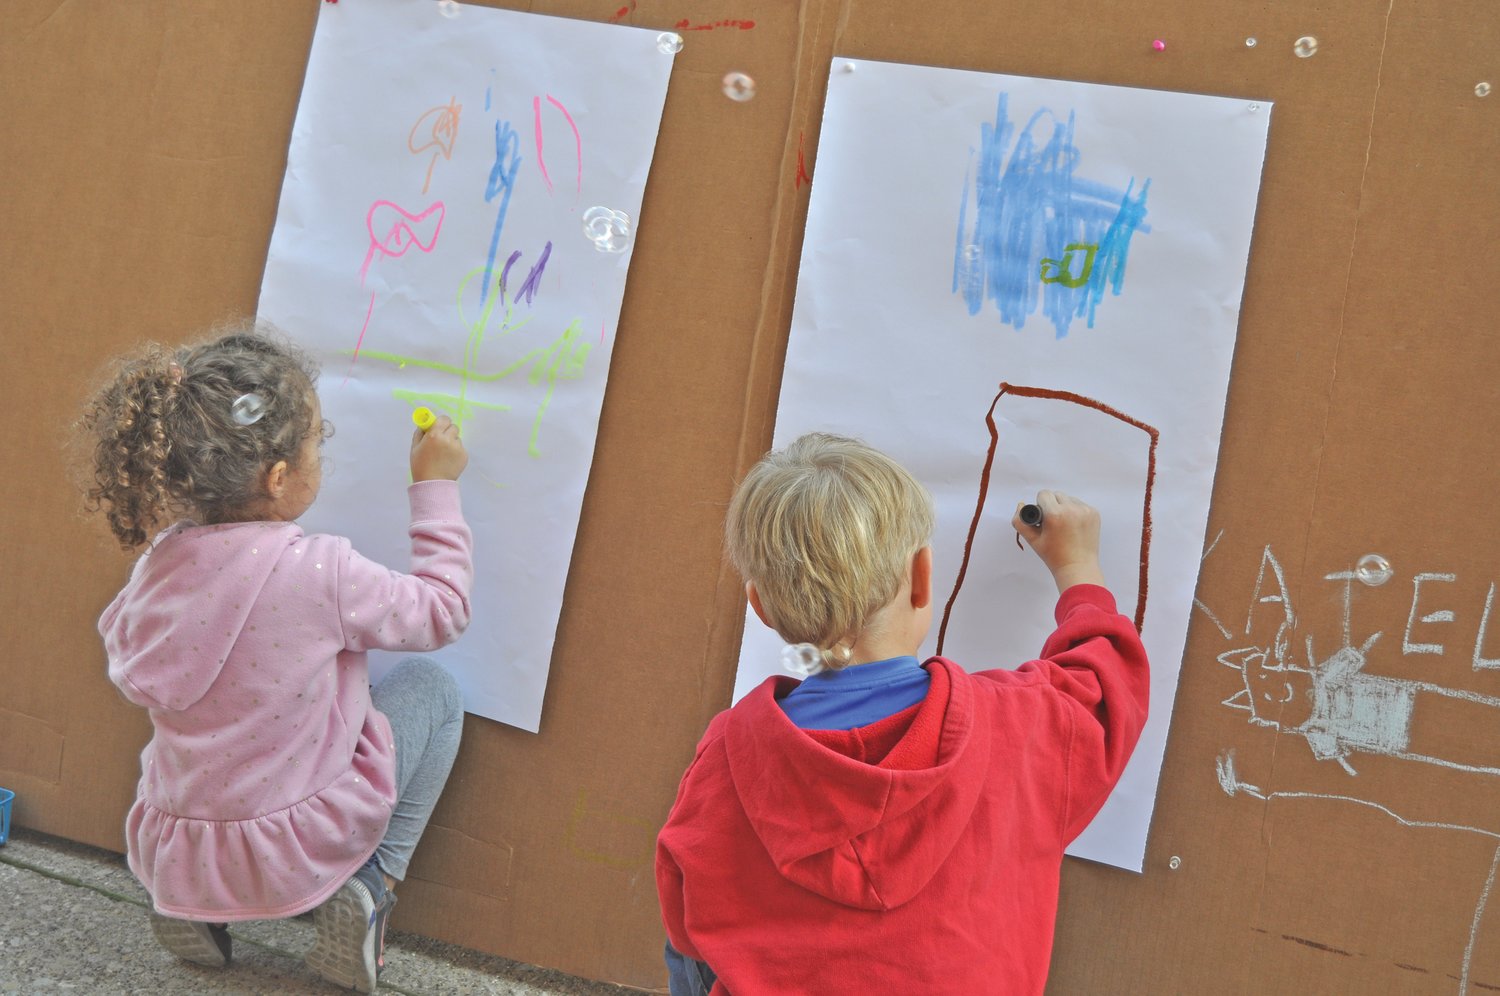 Children from Rainbows & Rhymes Preschool and Child Care draw pictures outside the Montgomery County Community Foundation building on Wednesday. The foundation has set up art stations for people to make art alongside muralist Jenna Morello.